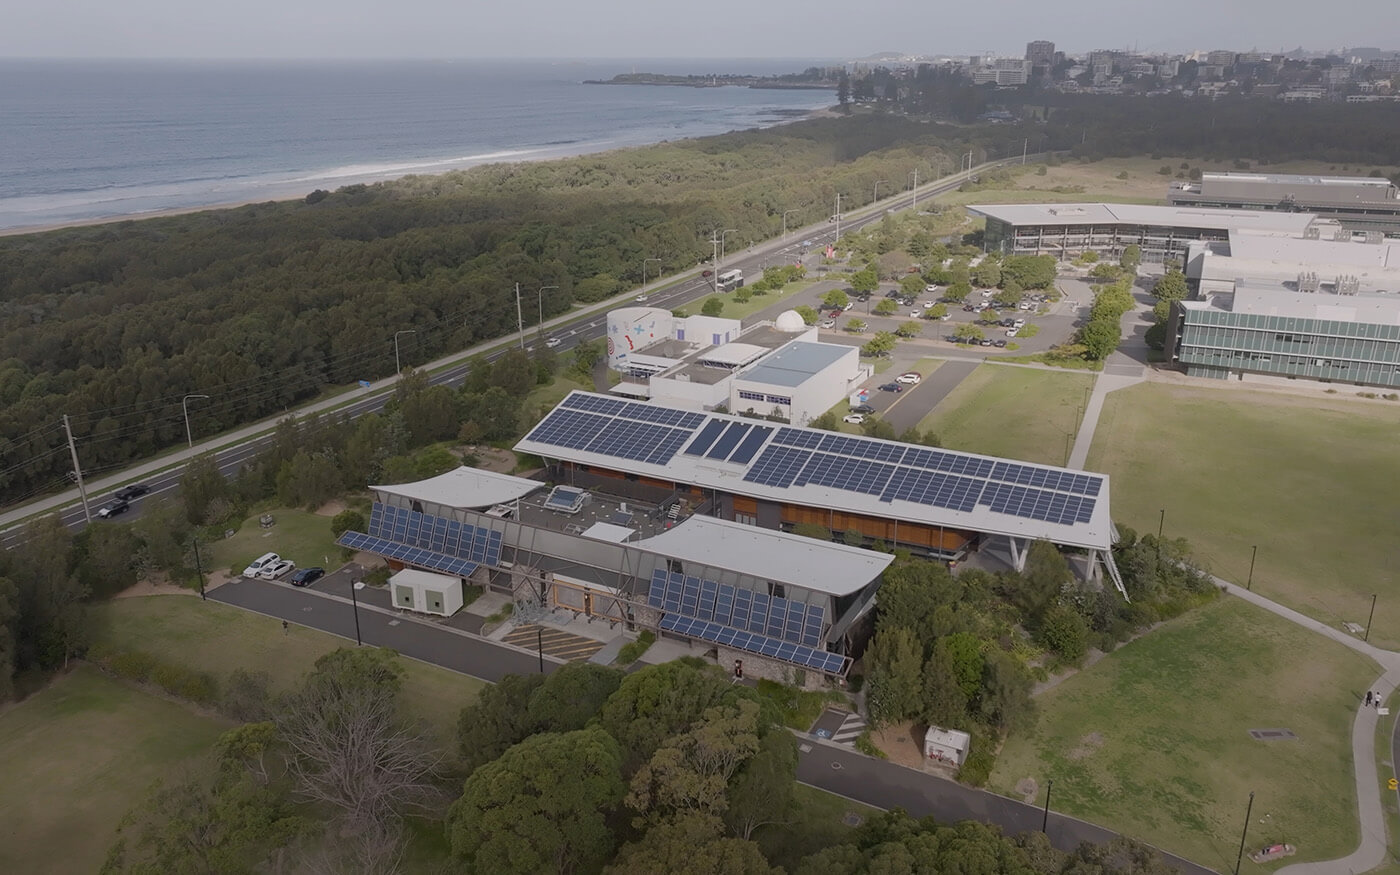 Aerial view of University of Wollongong with solar panels